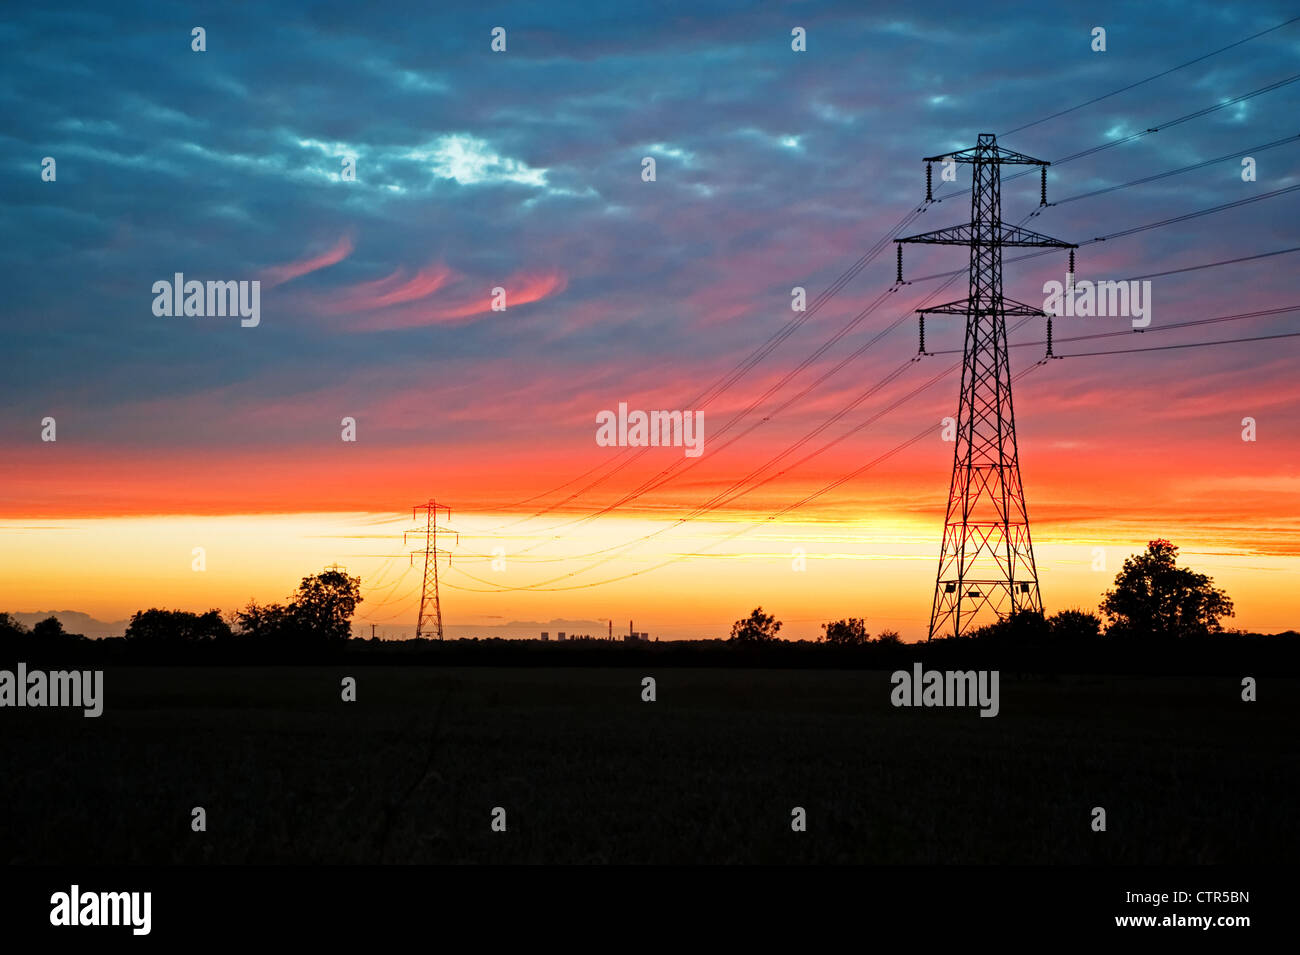 Sunset with electricity pylon silhouettes, Lincolnshire, UK. Stock Photo